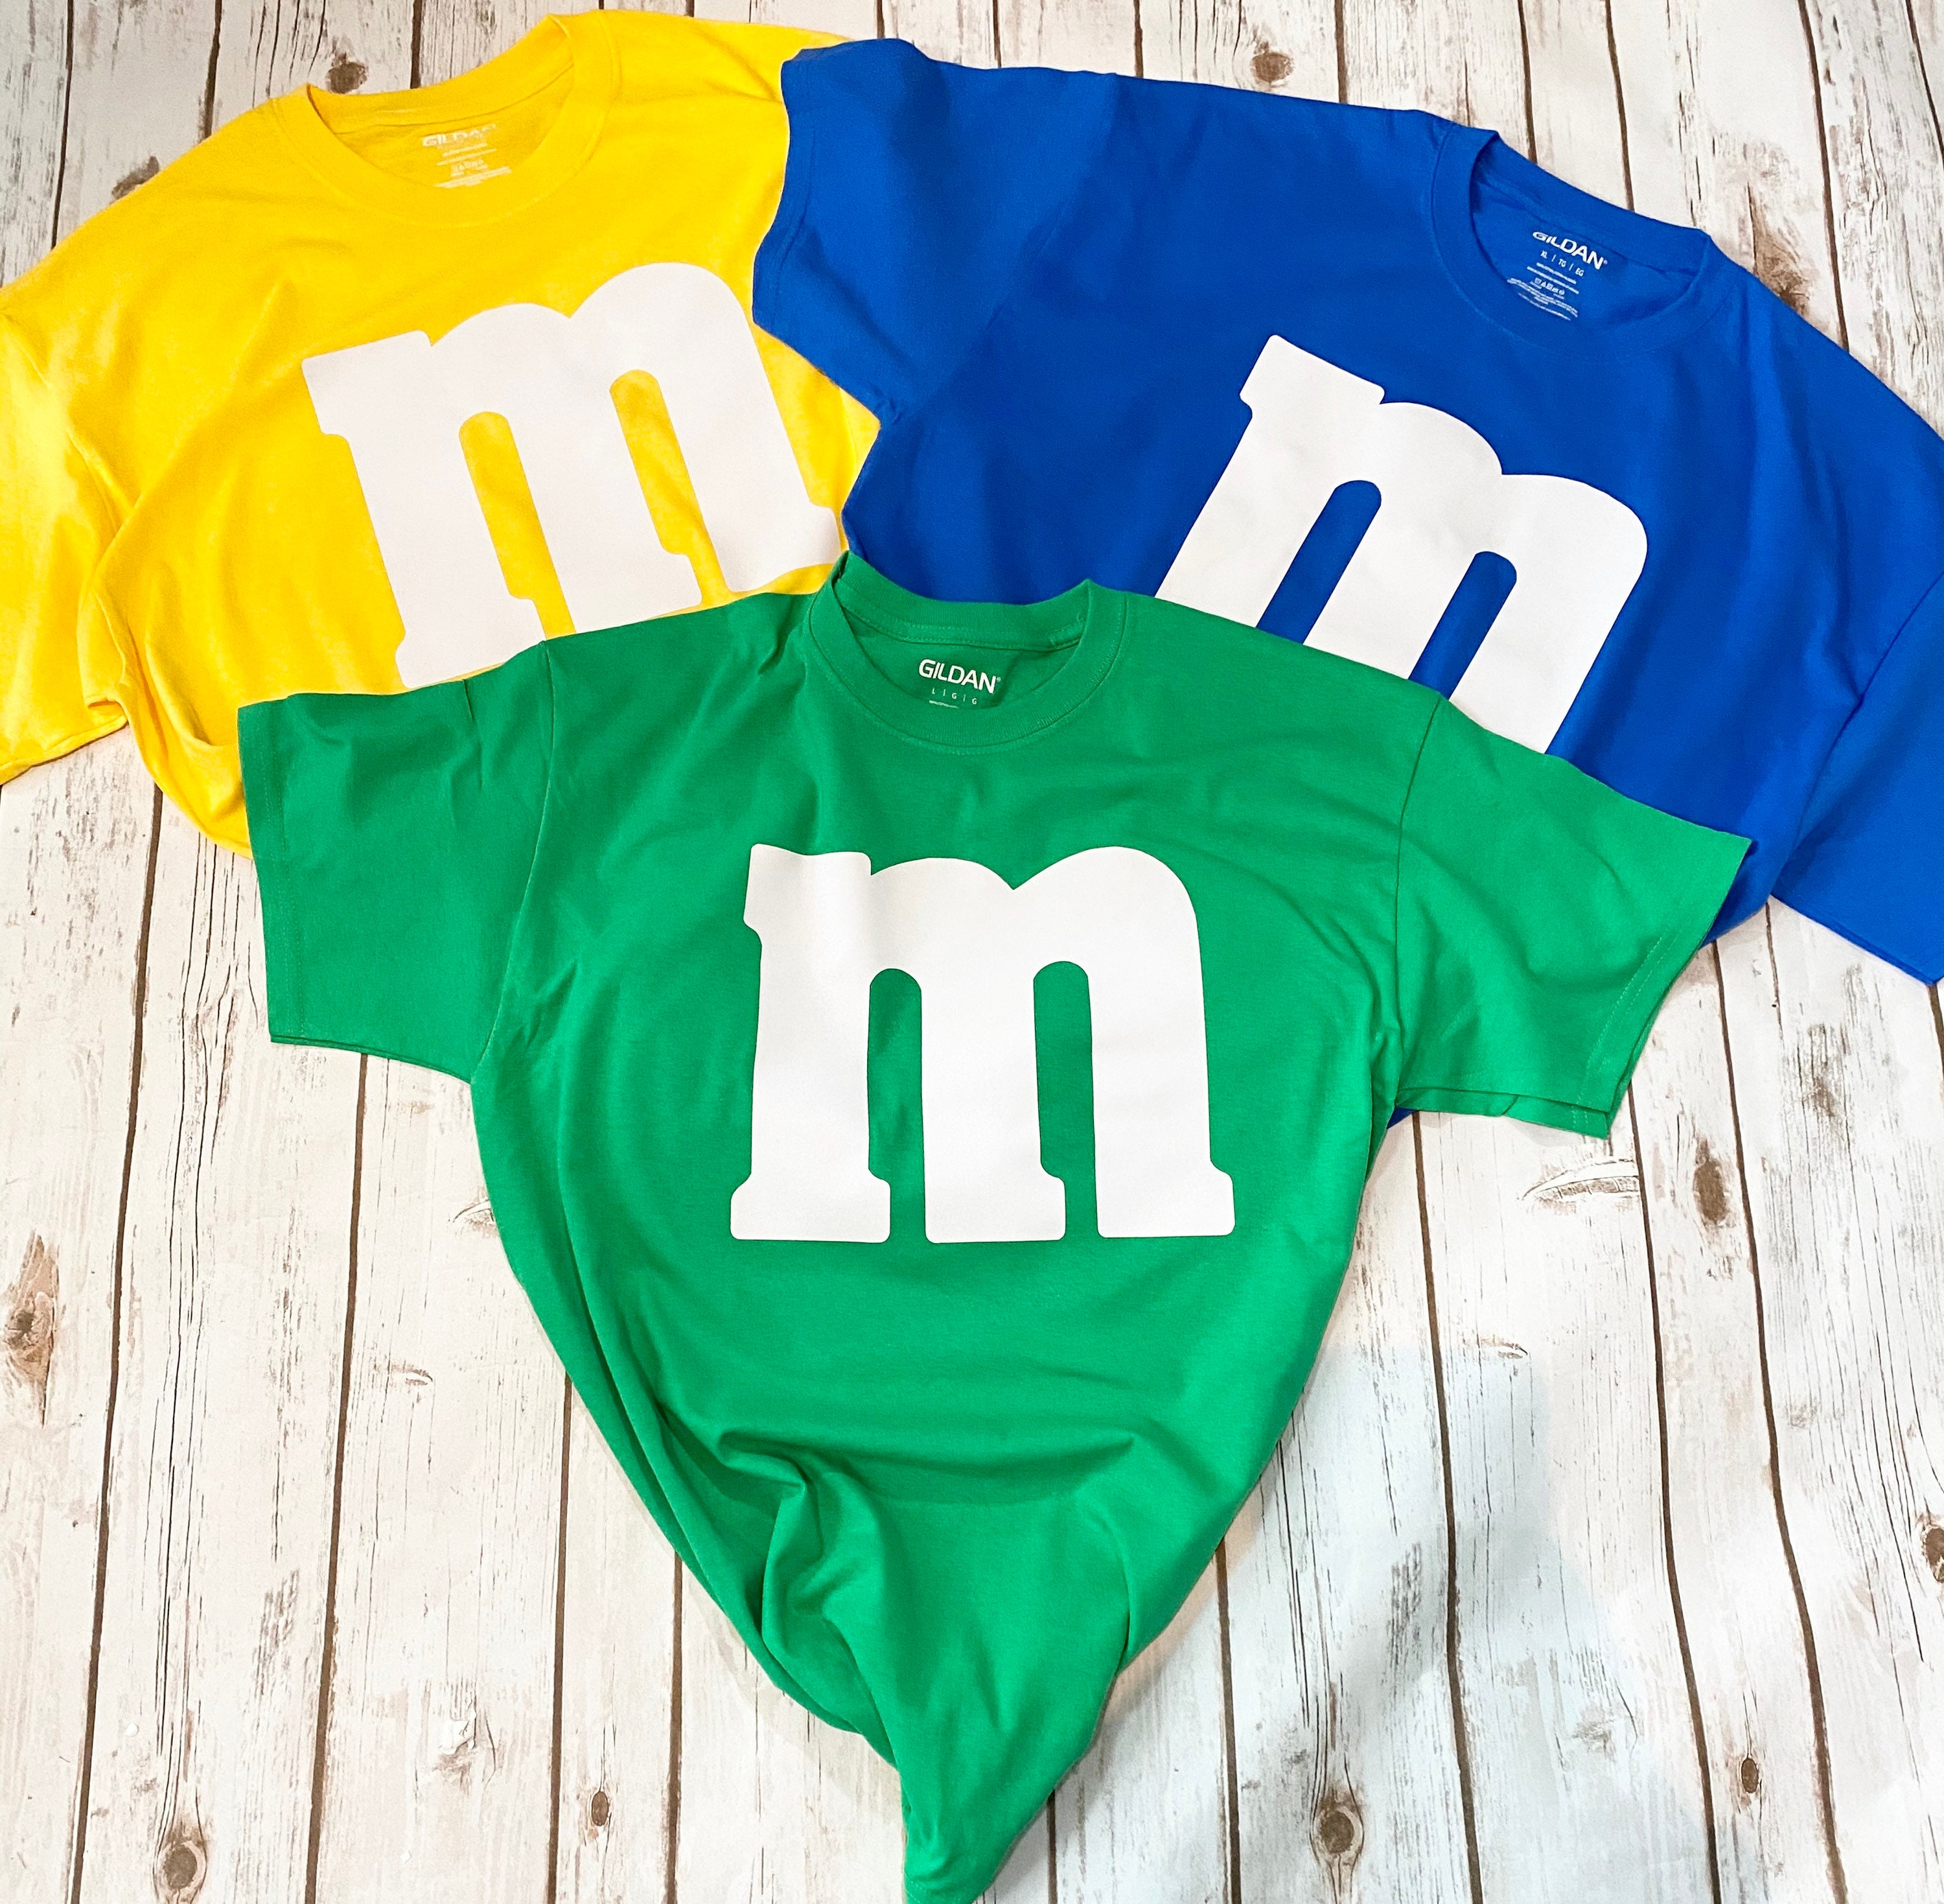 Adult Green M&M'S Costume Kit with Suspenders 